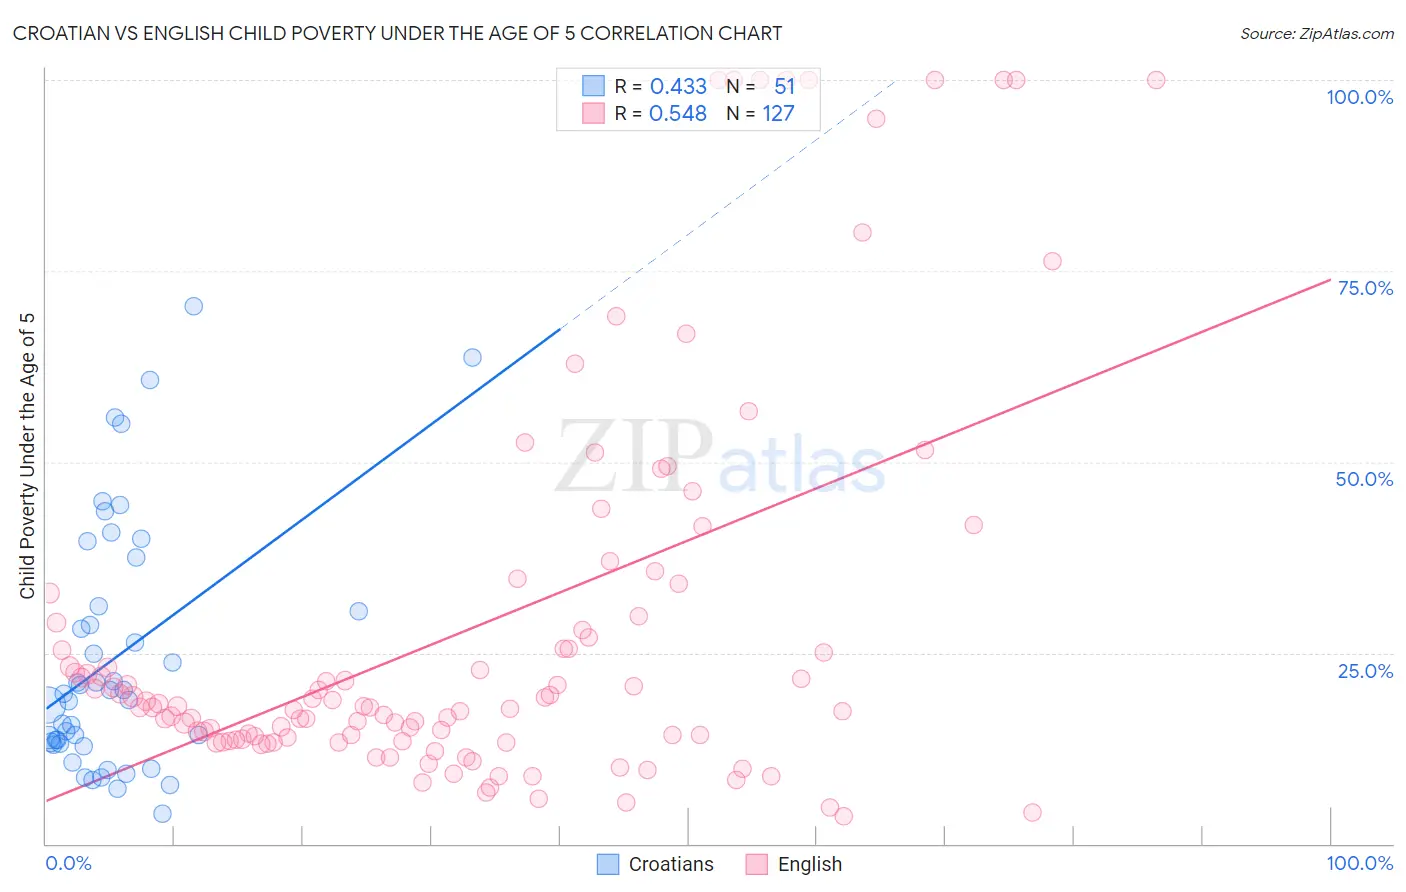 Croatian vs English Child Poverty Under the Age of 5